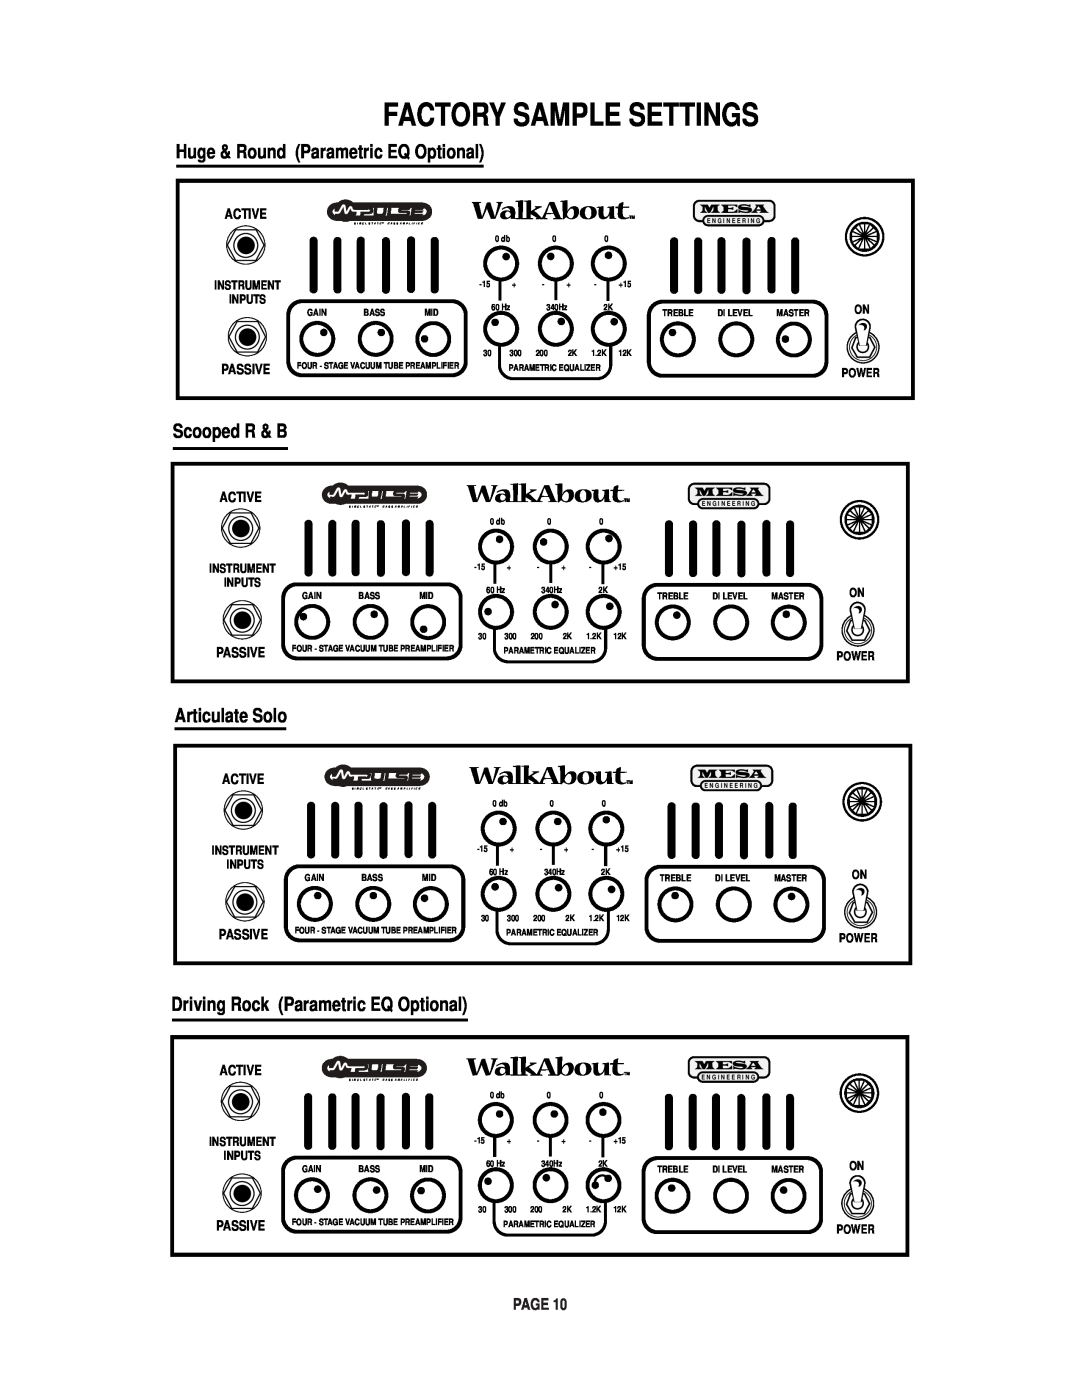 Mesa/Boogie Walk About Bass Amplifier Factory Sample Settings, Huge & Round Parametric EQ Optional, Scooped R & B, Active 